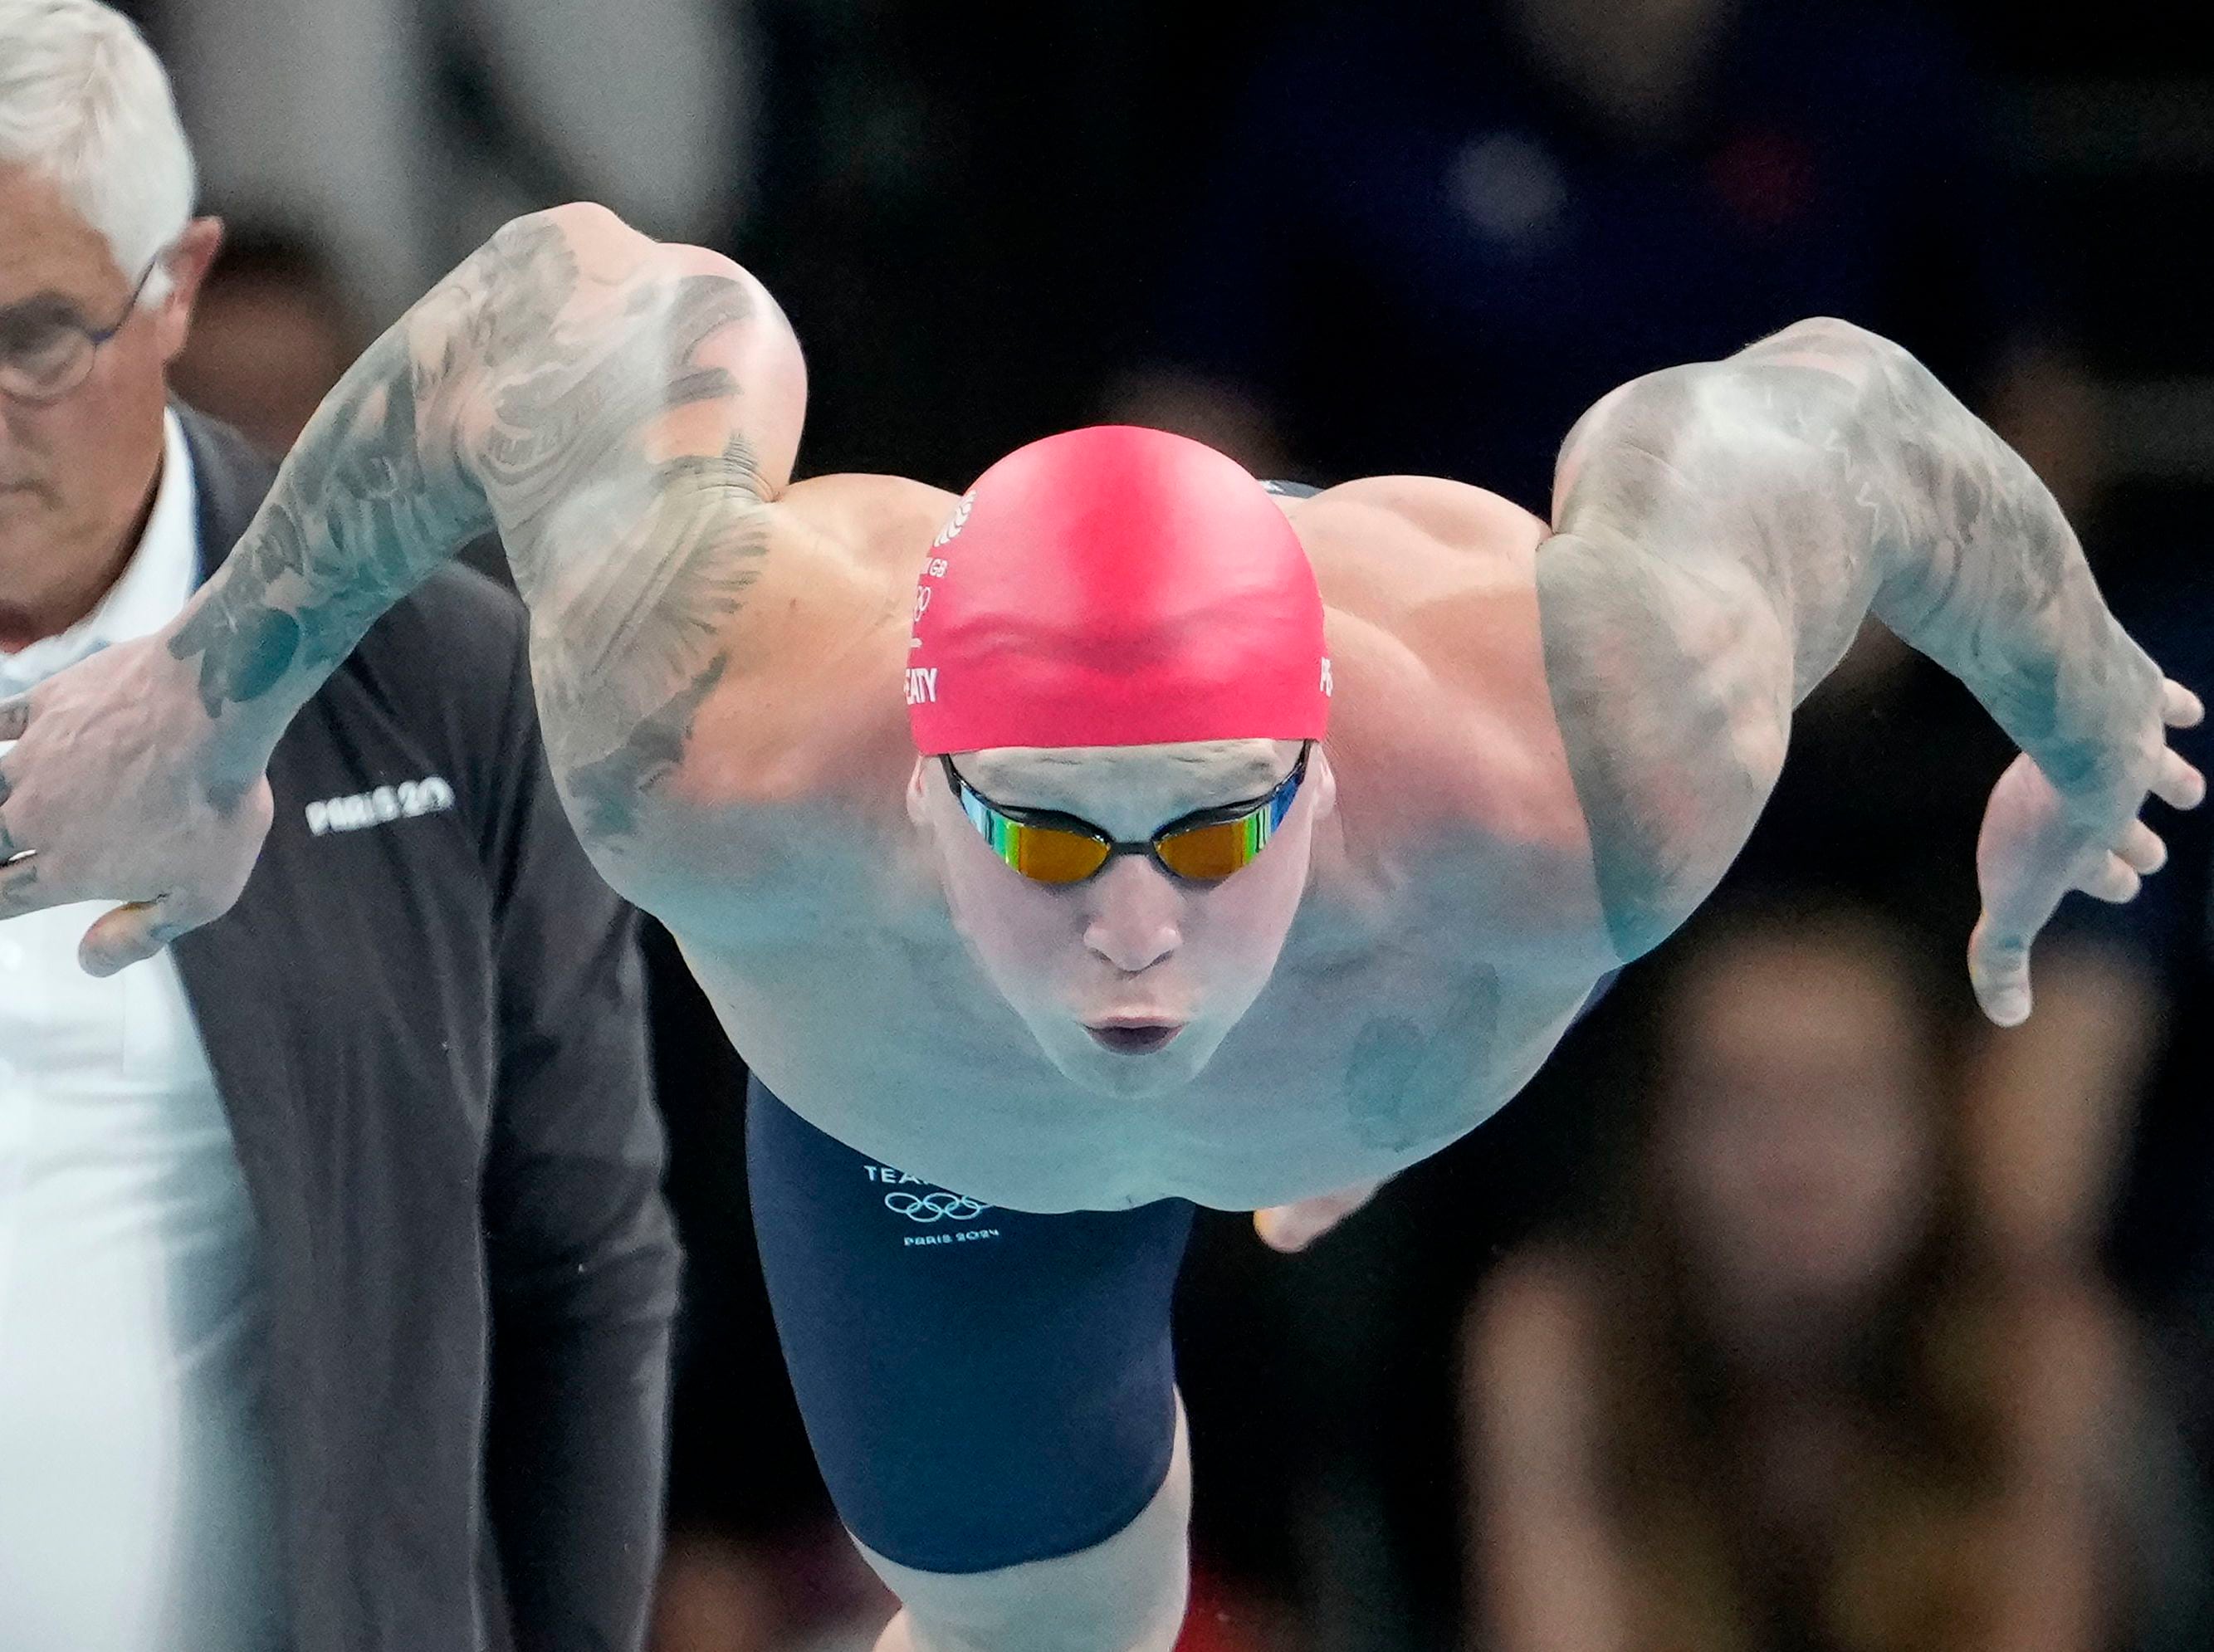 Adam Peaty describes 'worst week' as he makes Olympic return after Covid